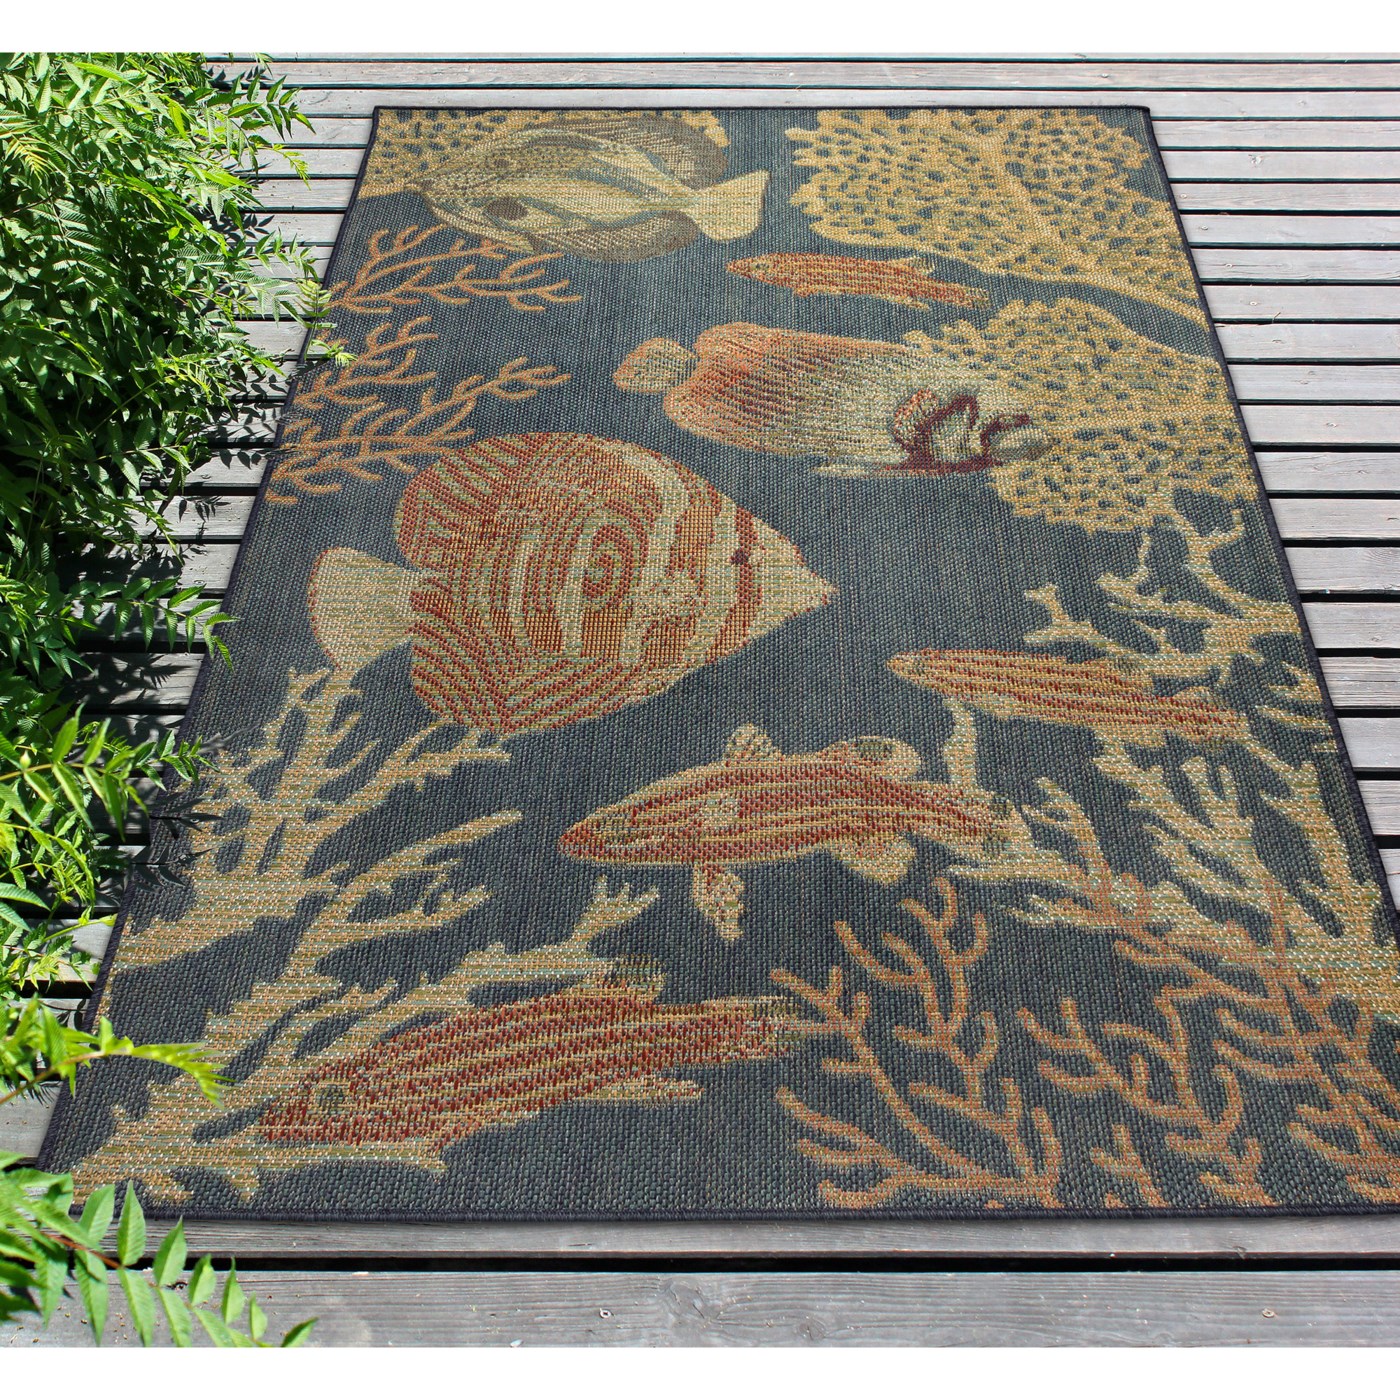 The Outdoor Rug Guide, Outdoor Rugs 101